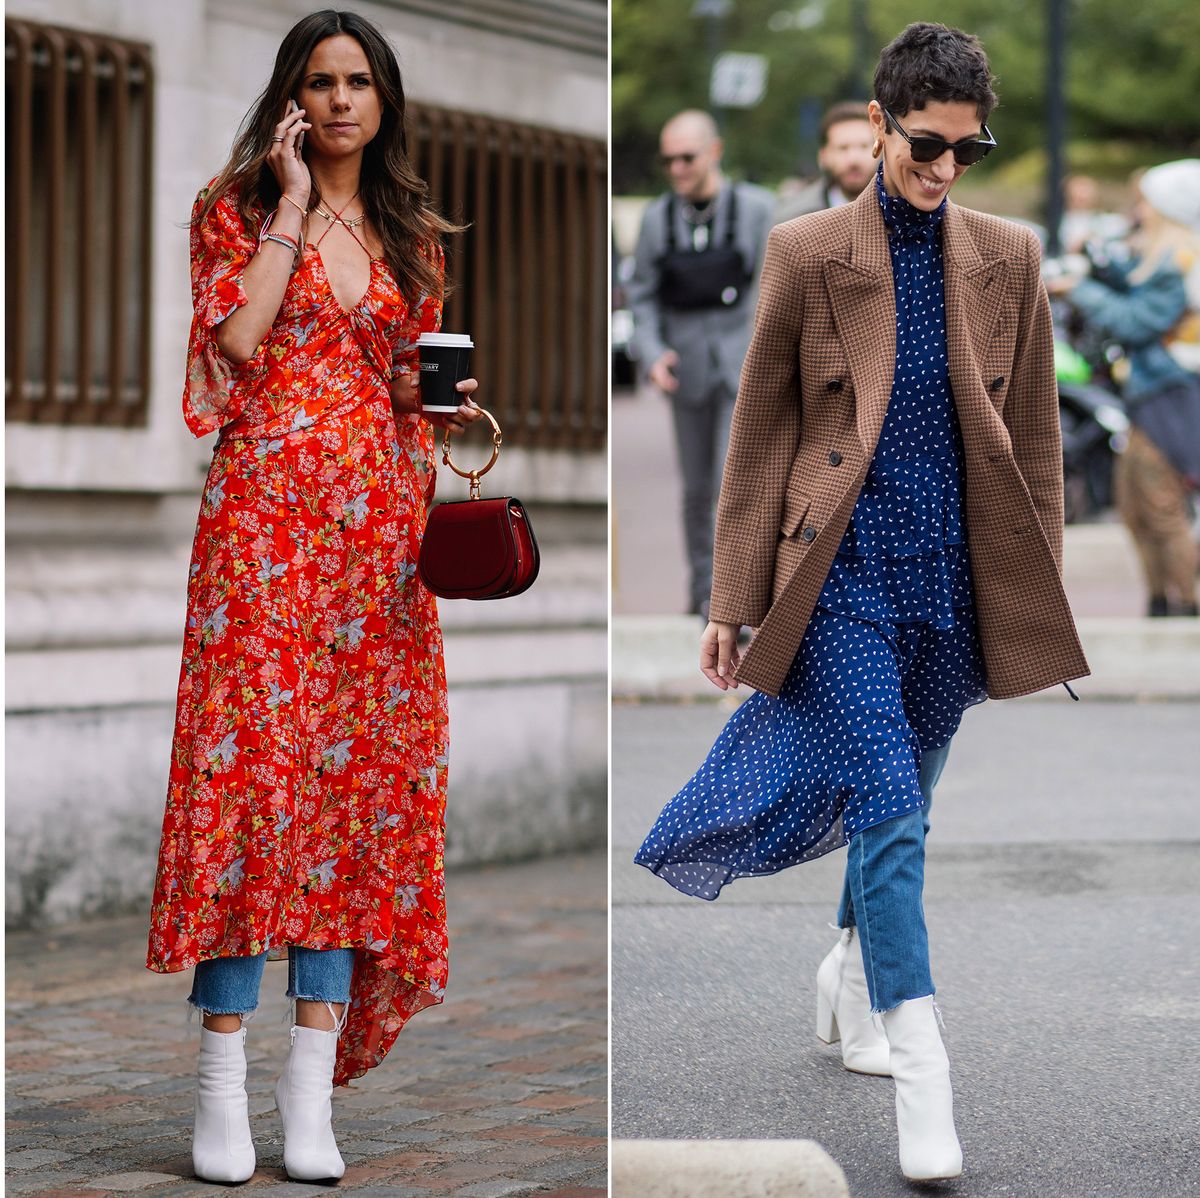 How to wear dresses over jeans – Styling advice for wearing dresses over  trousers